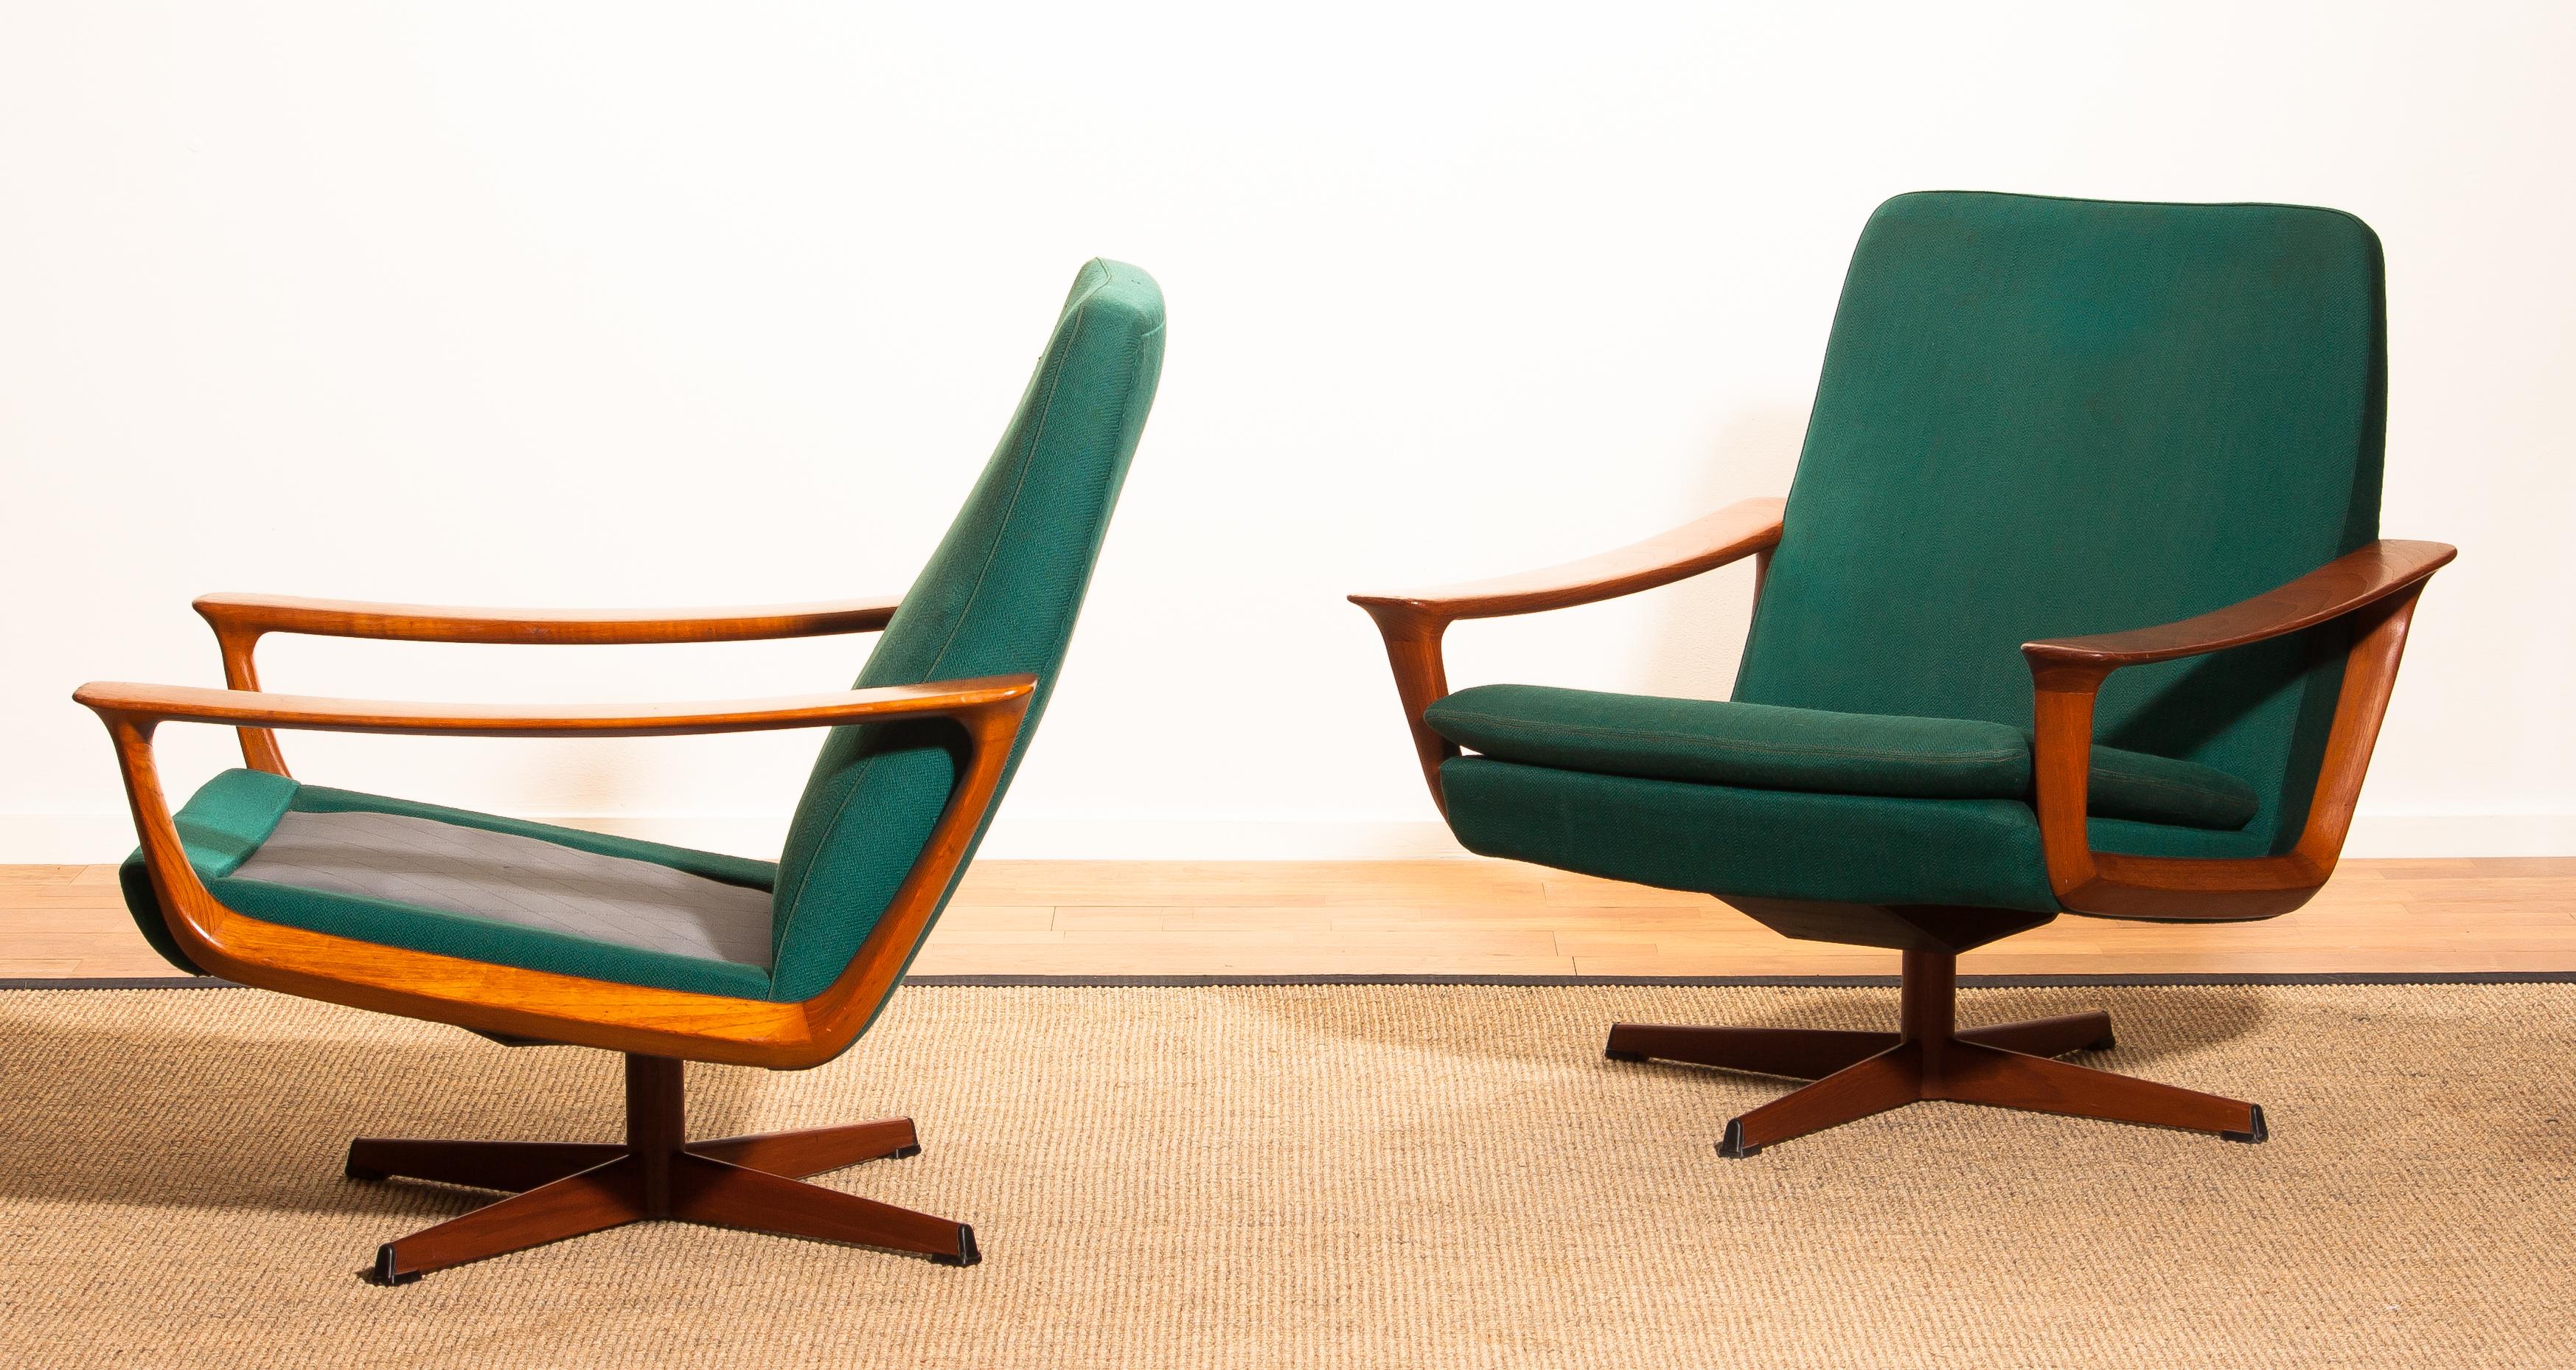 1960s, Teak Set of Two Swivel Chairs by Johannes Andersson for Trensum Denmark In Good Condition In Silvolde, Gelderland